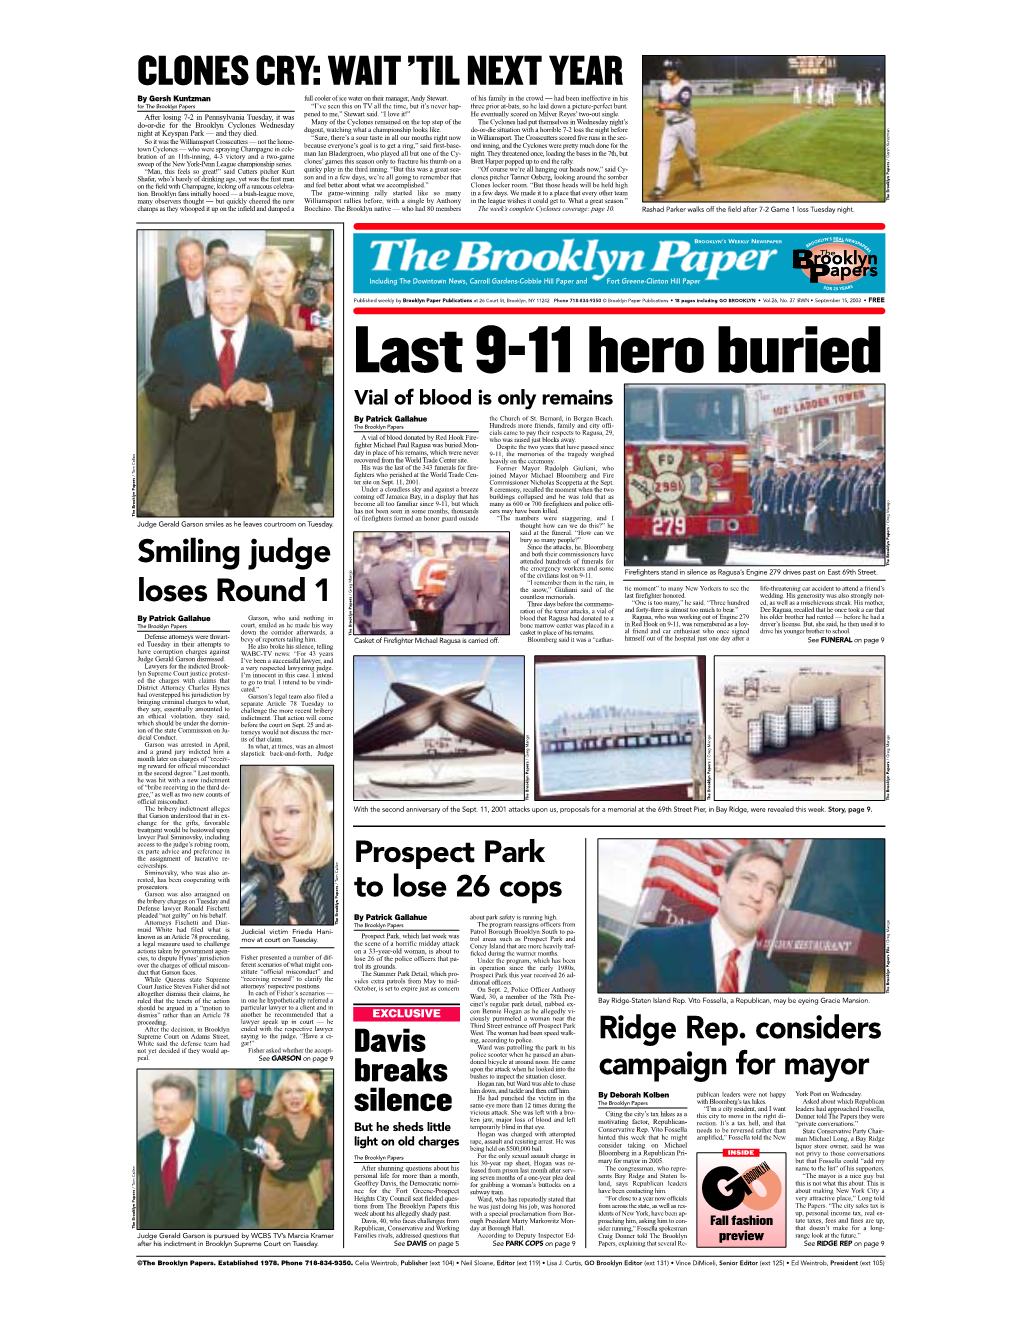 Last 9-11 Hero Buried Vial of Blood Is Only Remains by Patrick Gallahue the Church of St